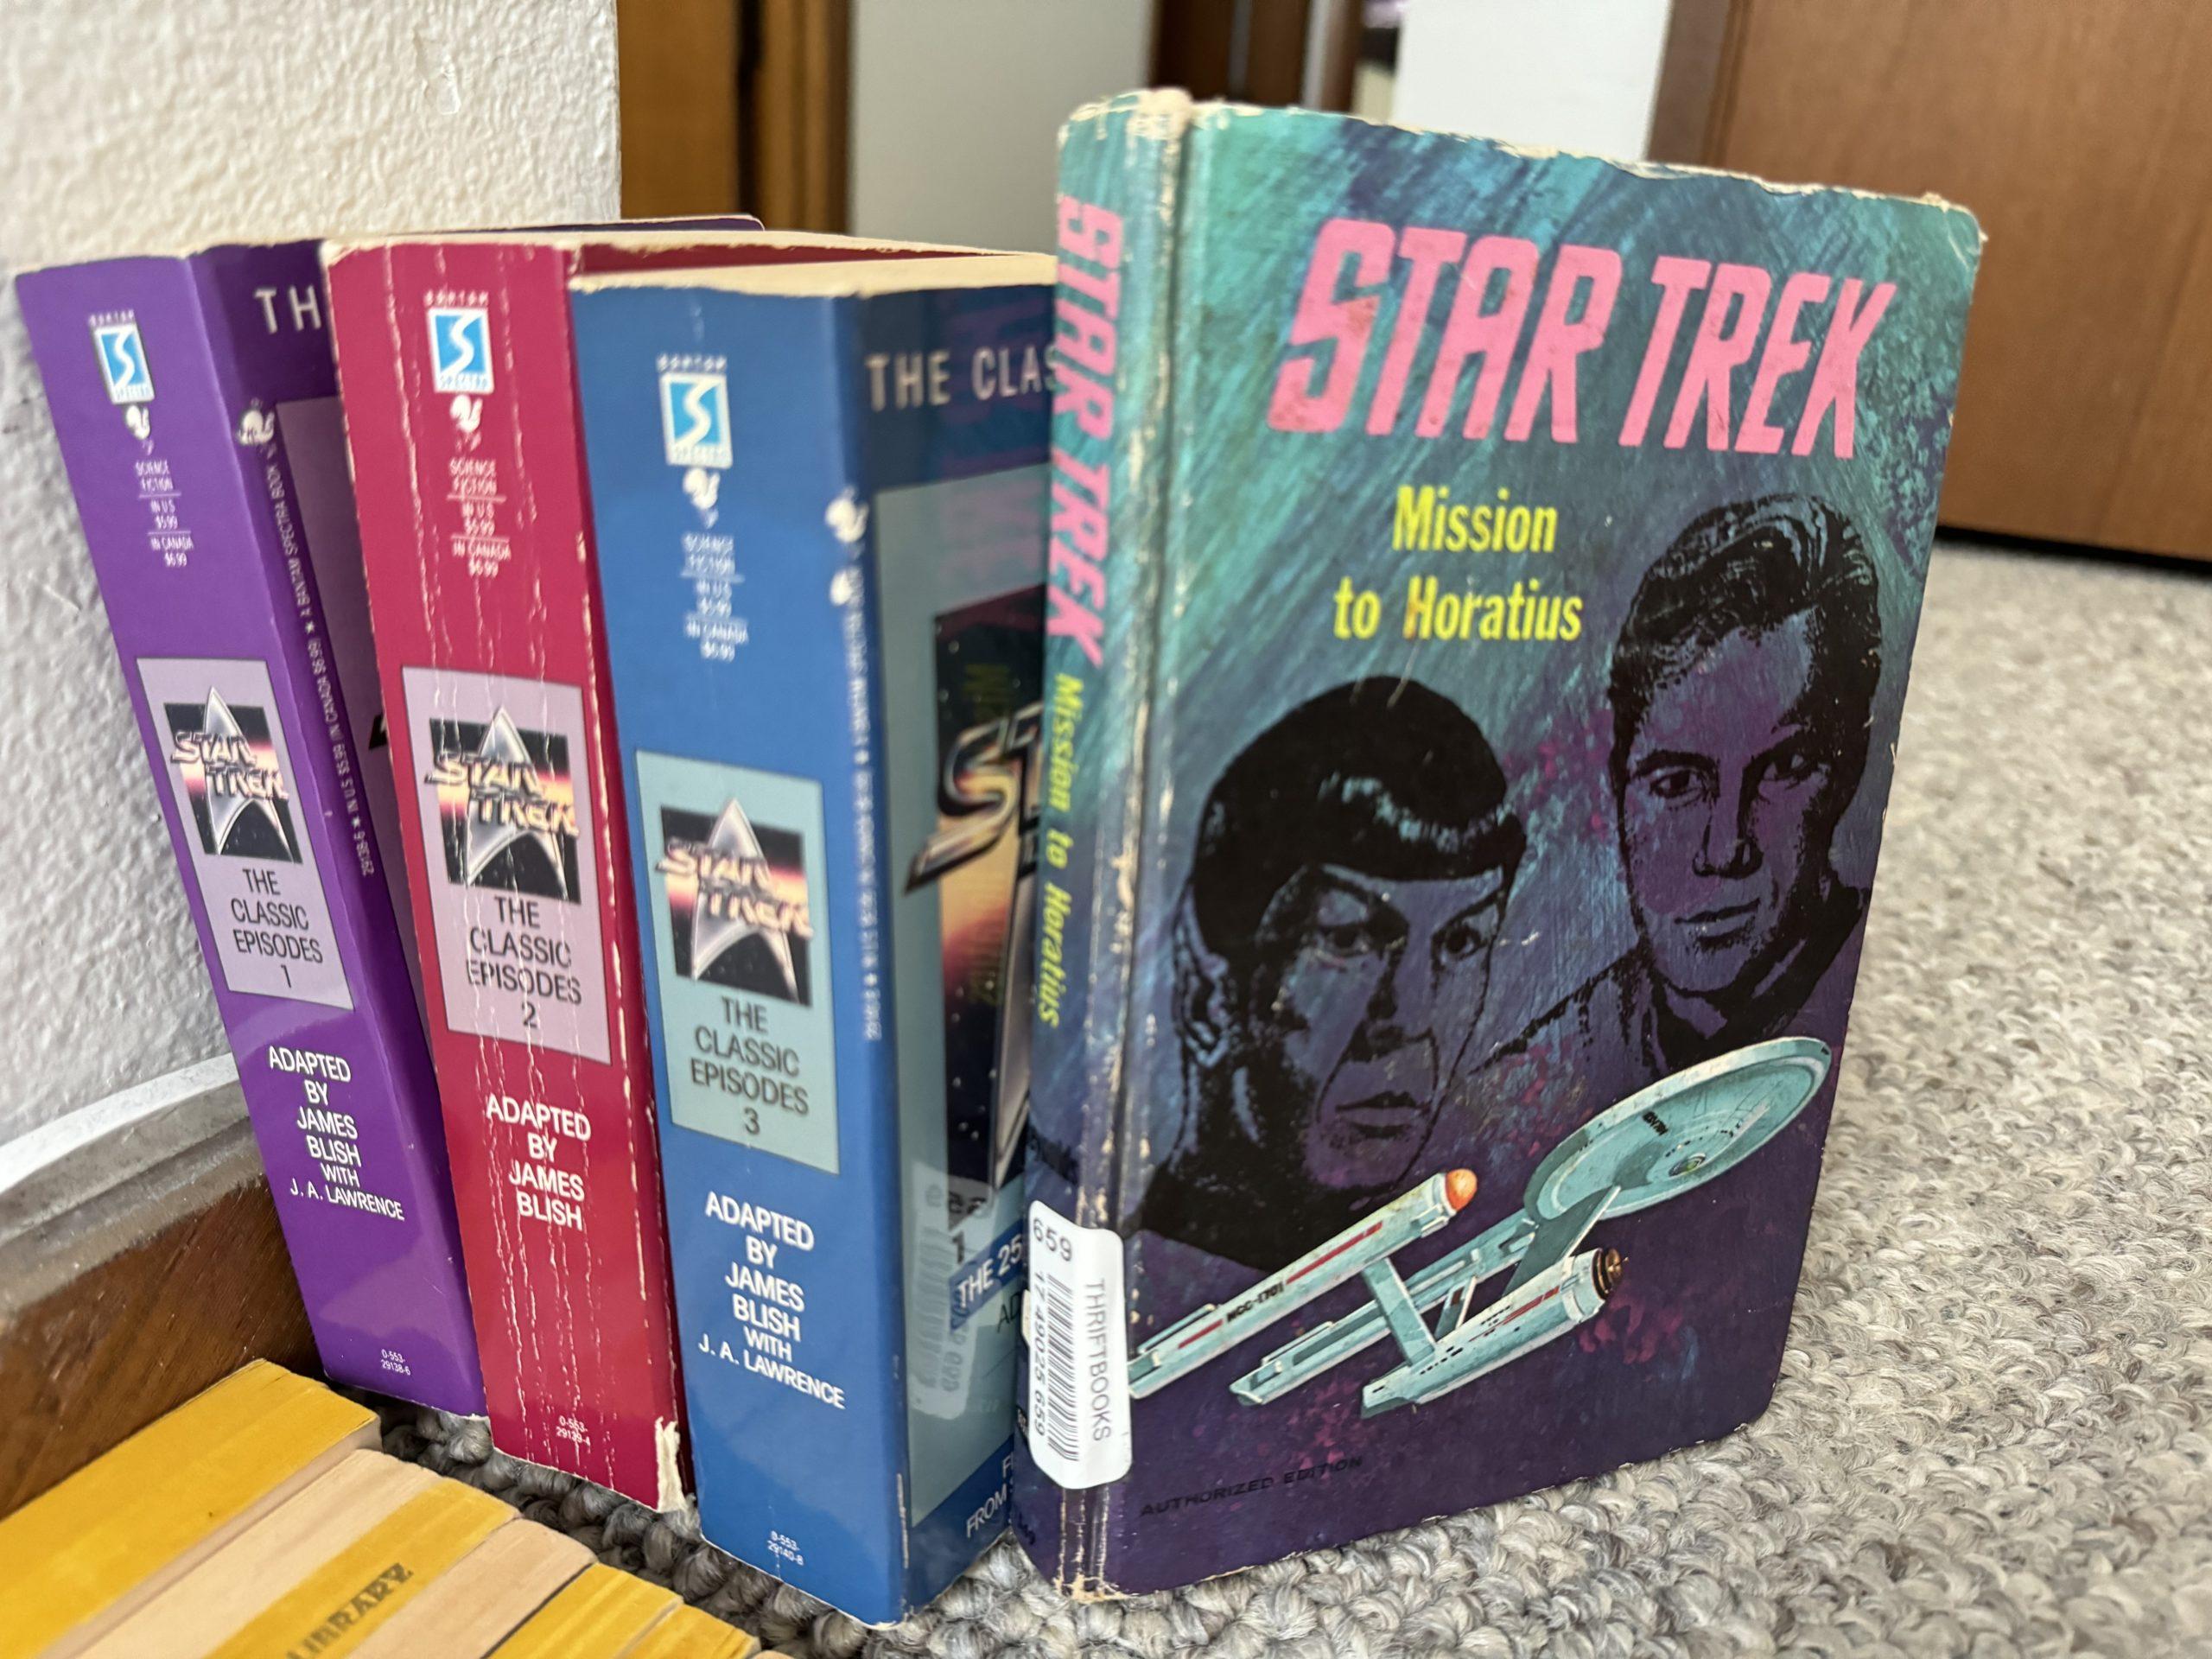 The three-volume Classic Episodes set of James Blish's episode adapations, and Mission to Horatius.